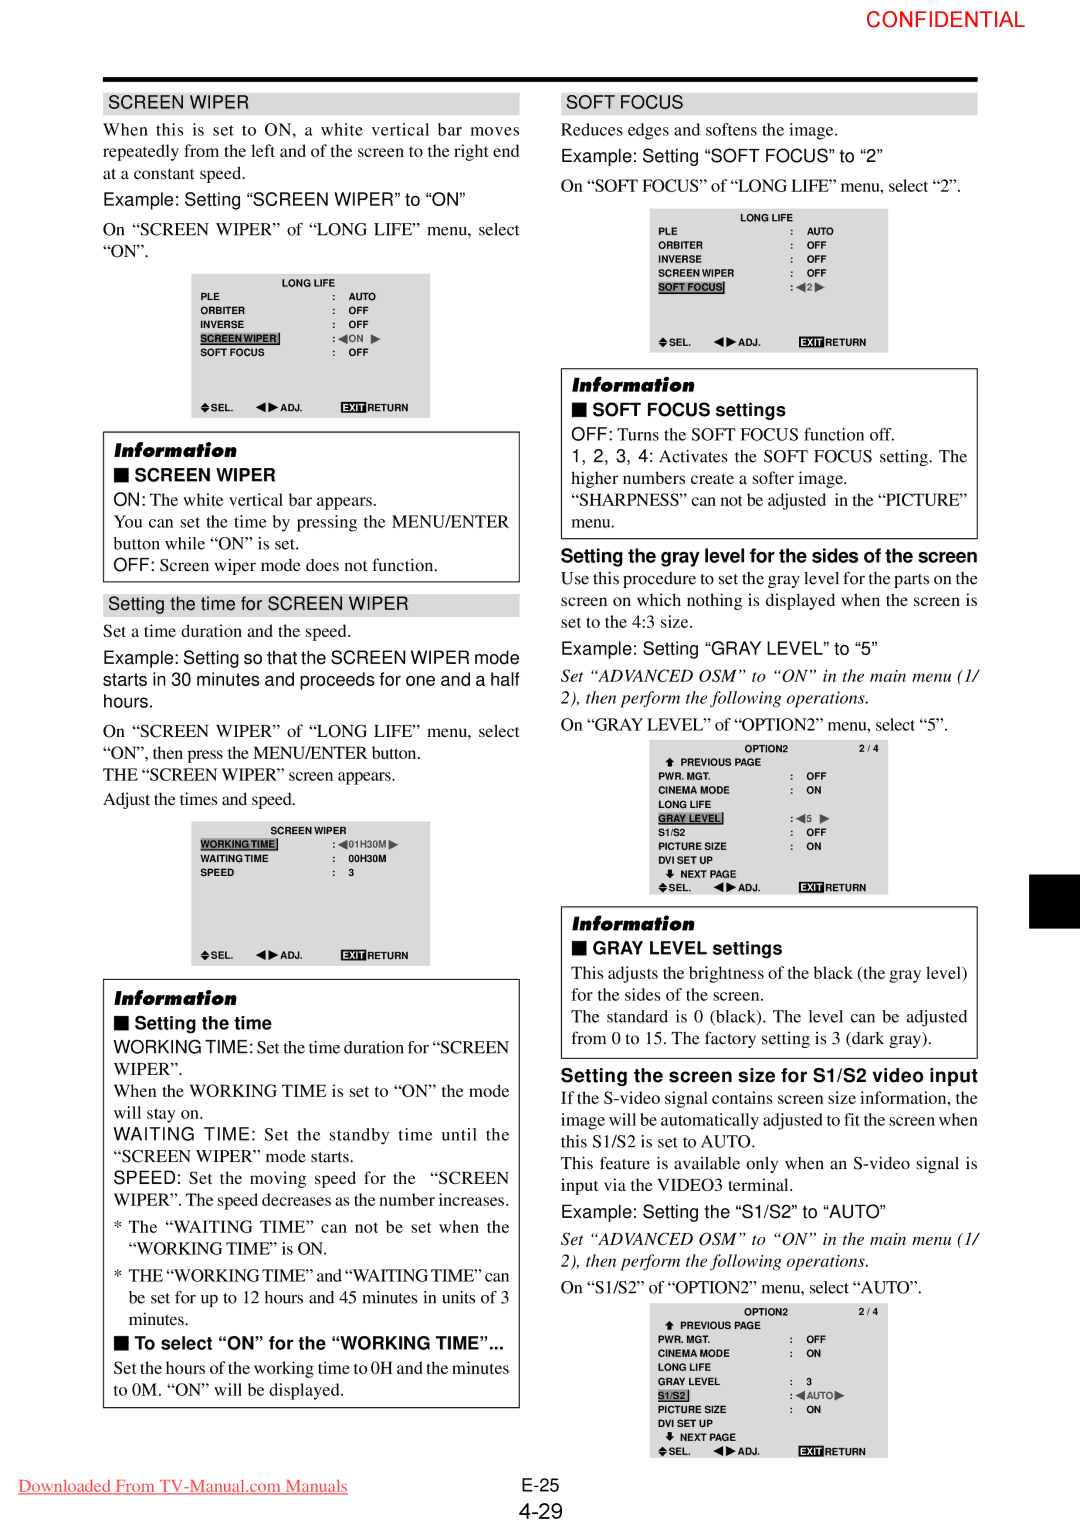 NEC 61XM3 user manual Setting the gray level for the sides of the screen, Setting the screen size for S1/S2 video input 